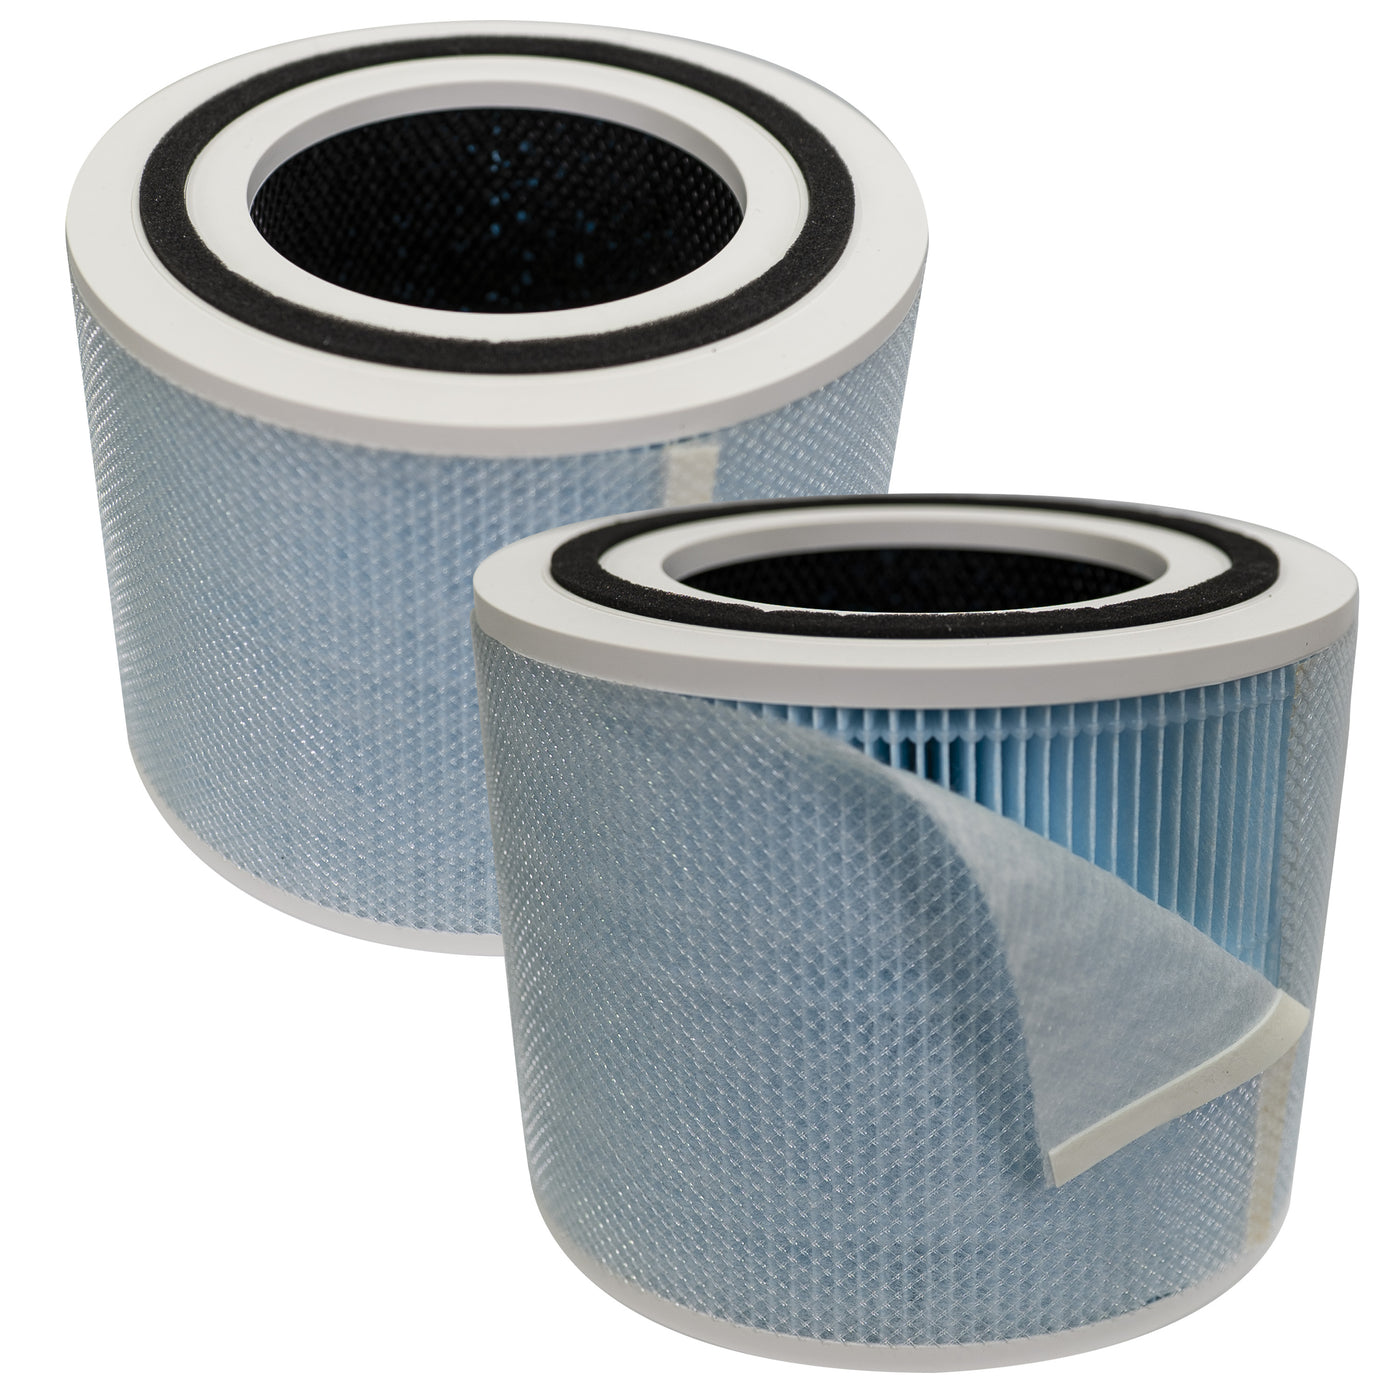 Levoit -pur131 Replacement Filter Set - 2 Hepa Filters & 2